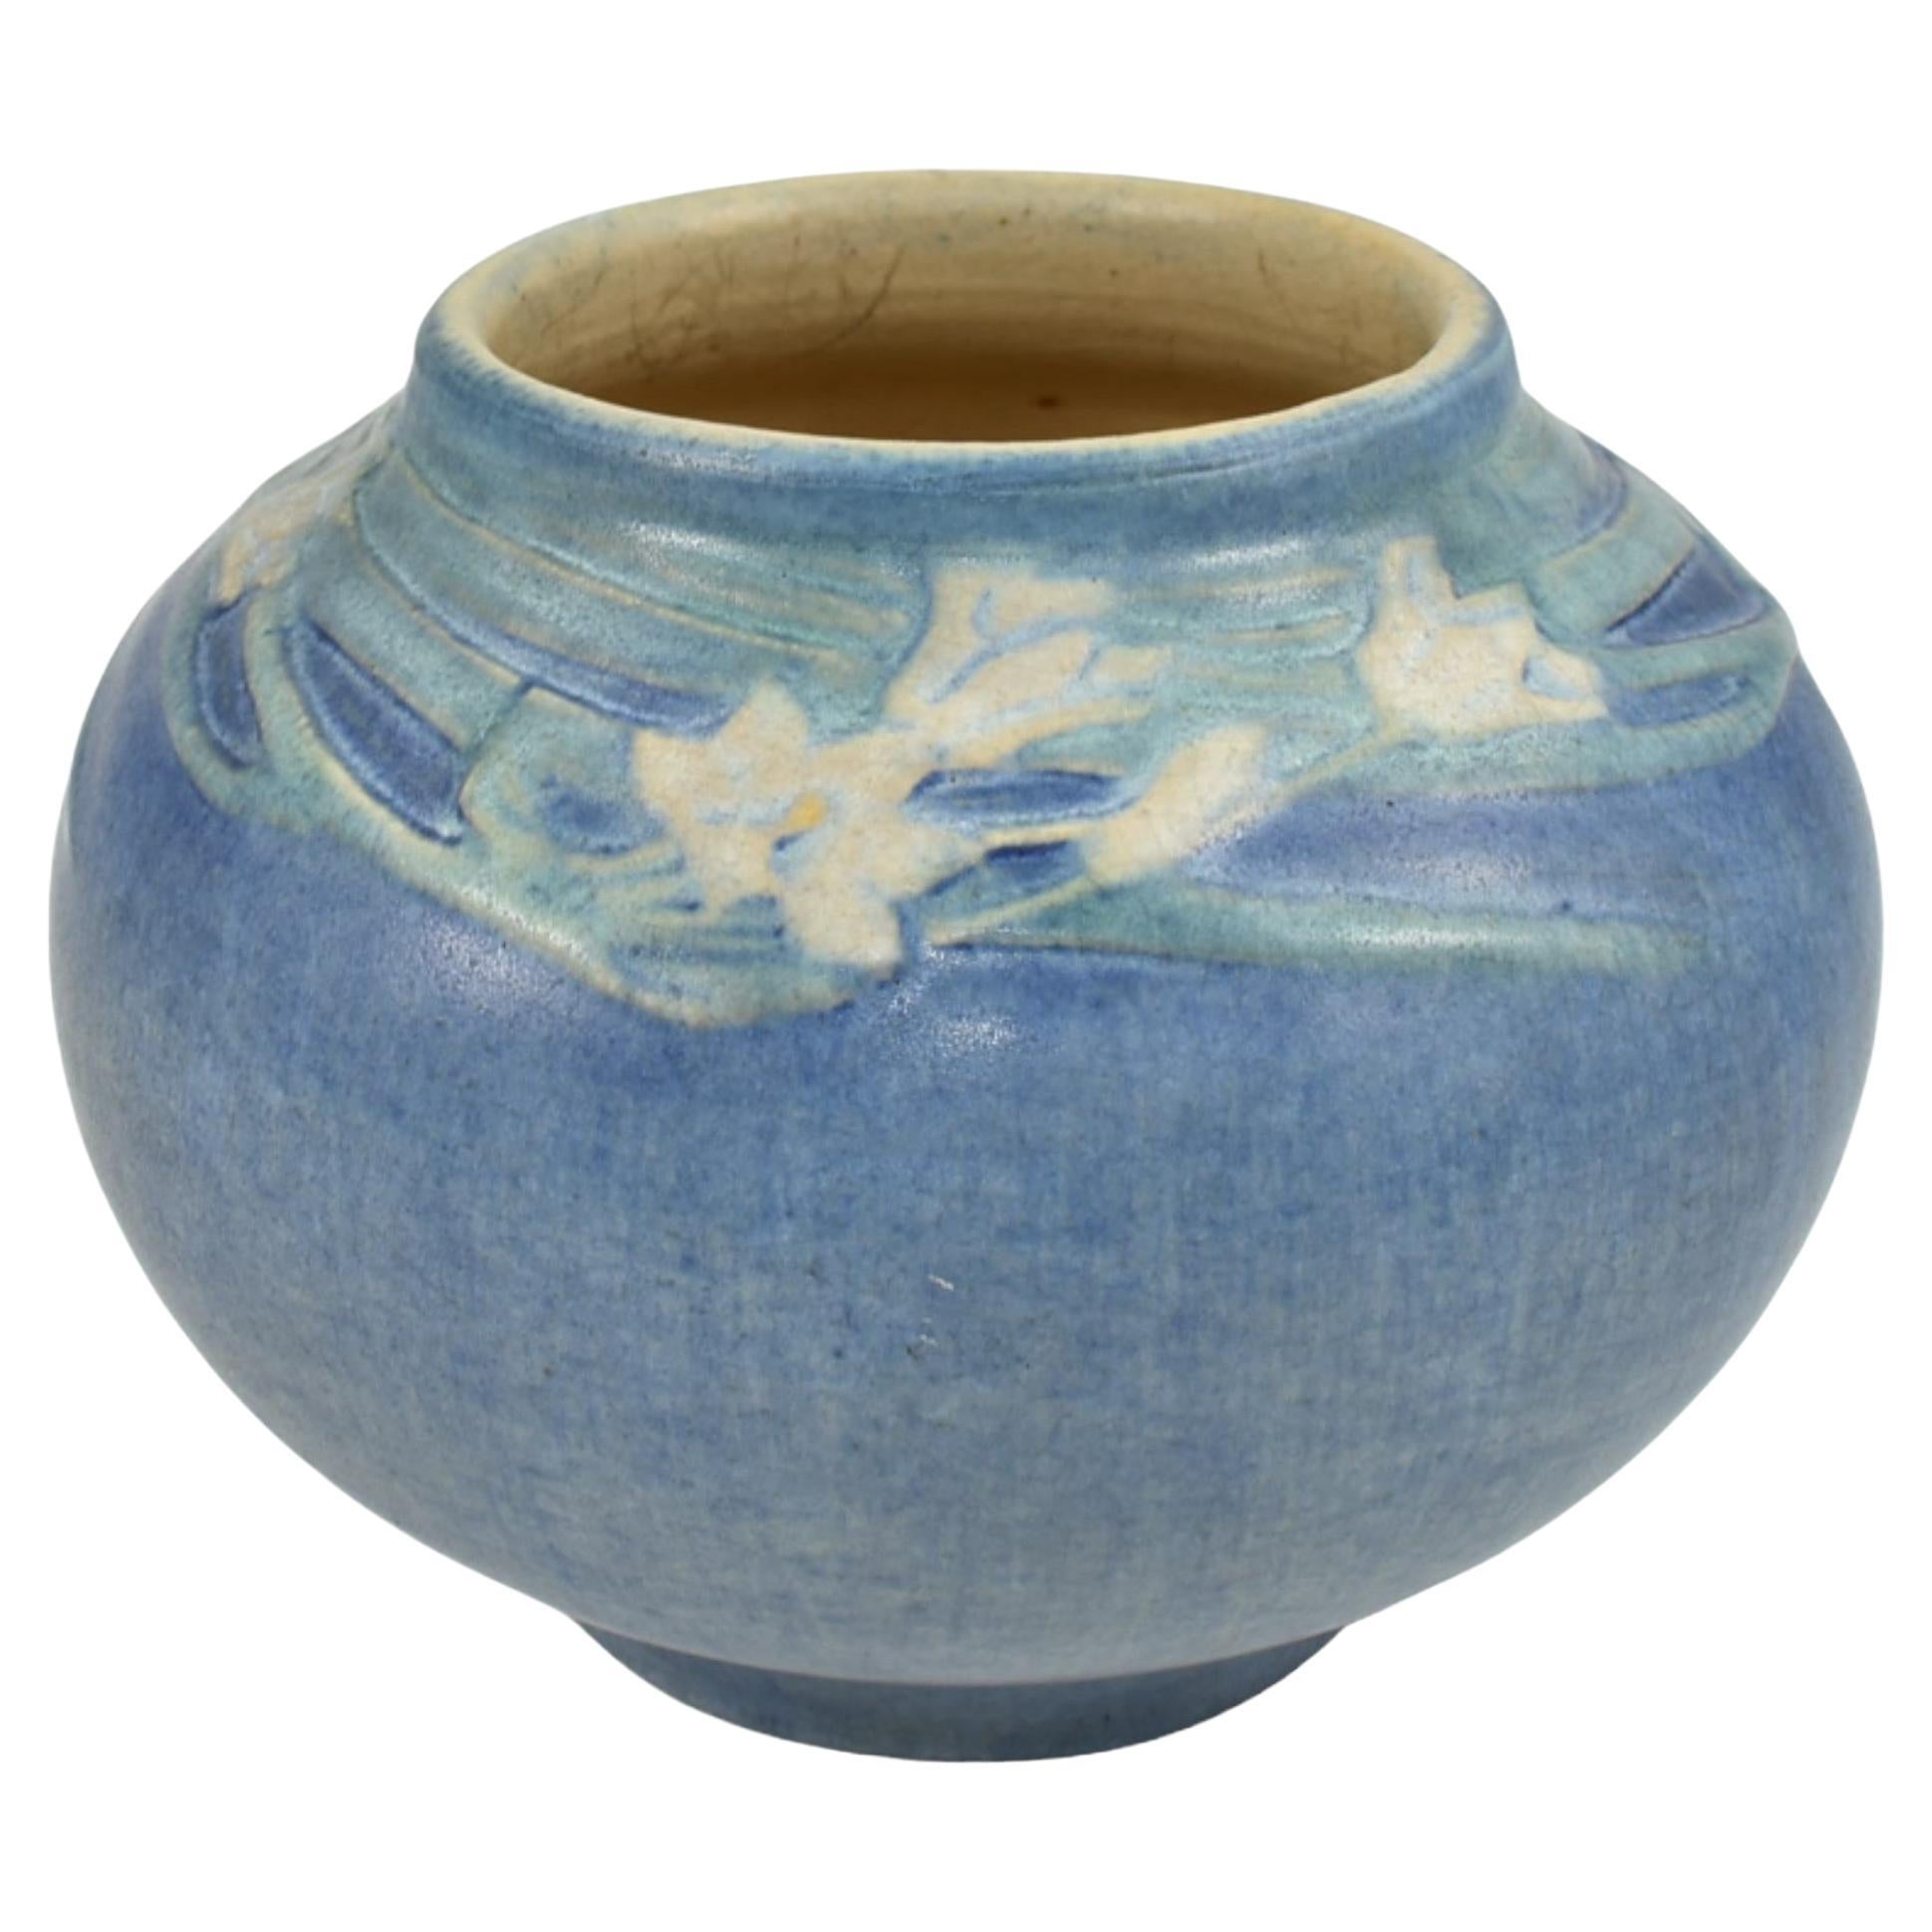 Newcomb College 1921 Arts and Crafts Pottery Freesia Blaue Keramikvase Simpson, Newcomb College